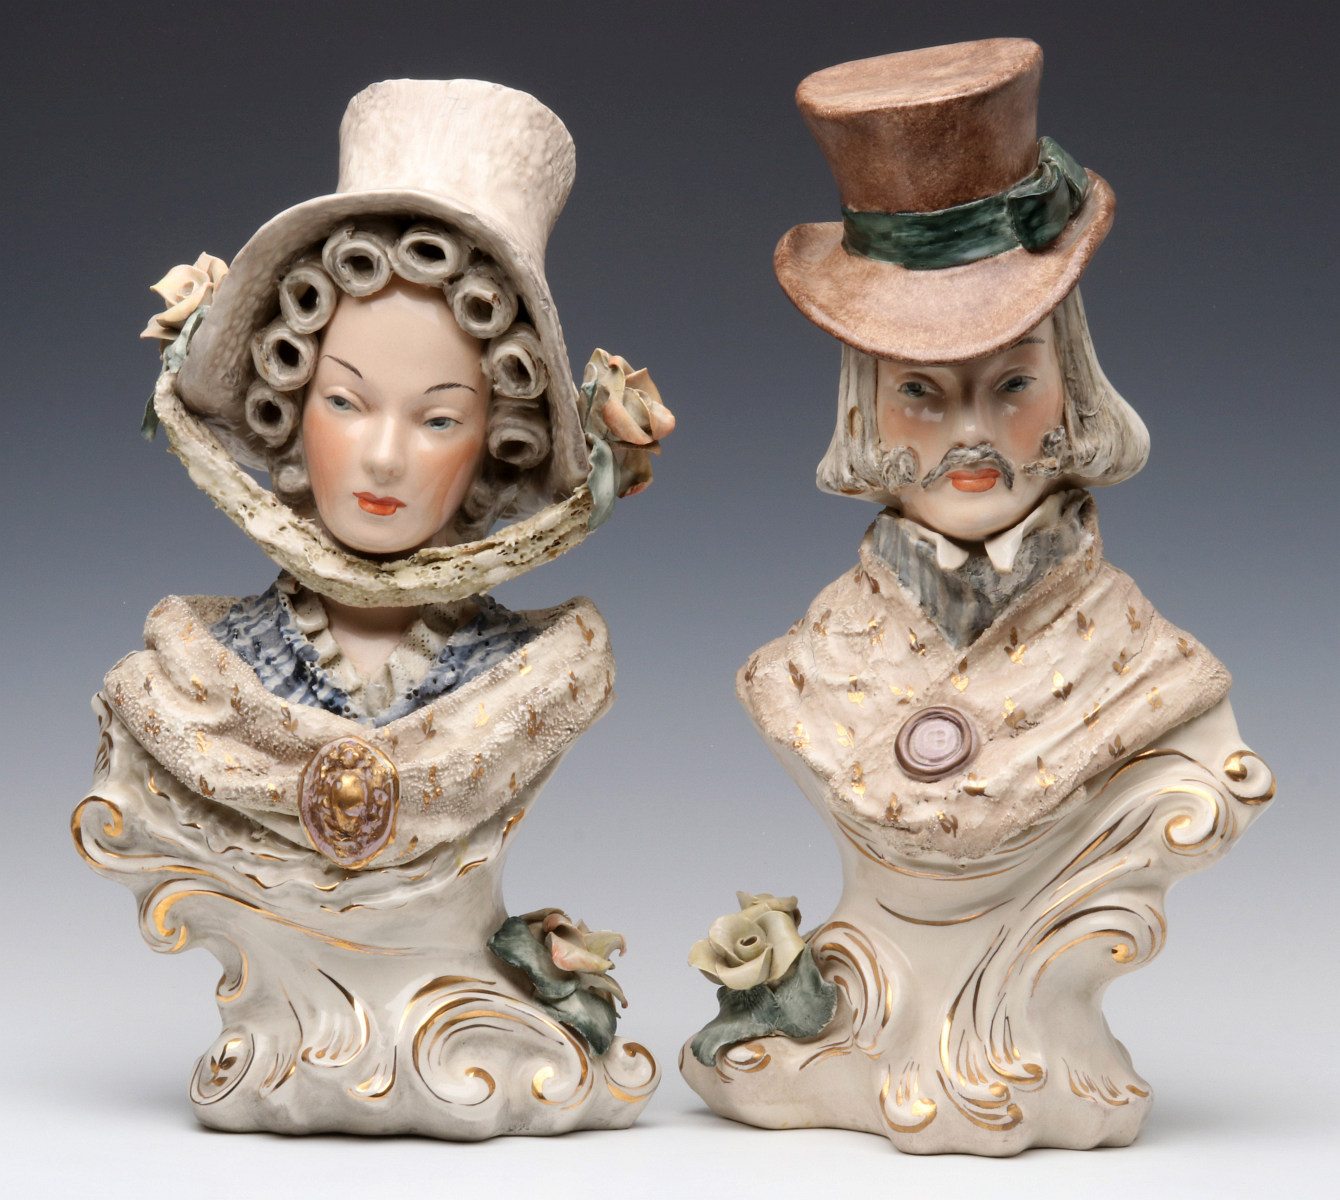 A PAIR 17-INCH PORCELAIN BUST FIGURES BY CORDEY